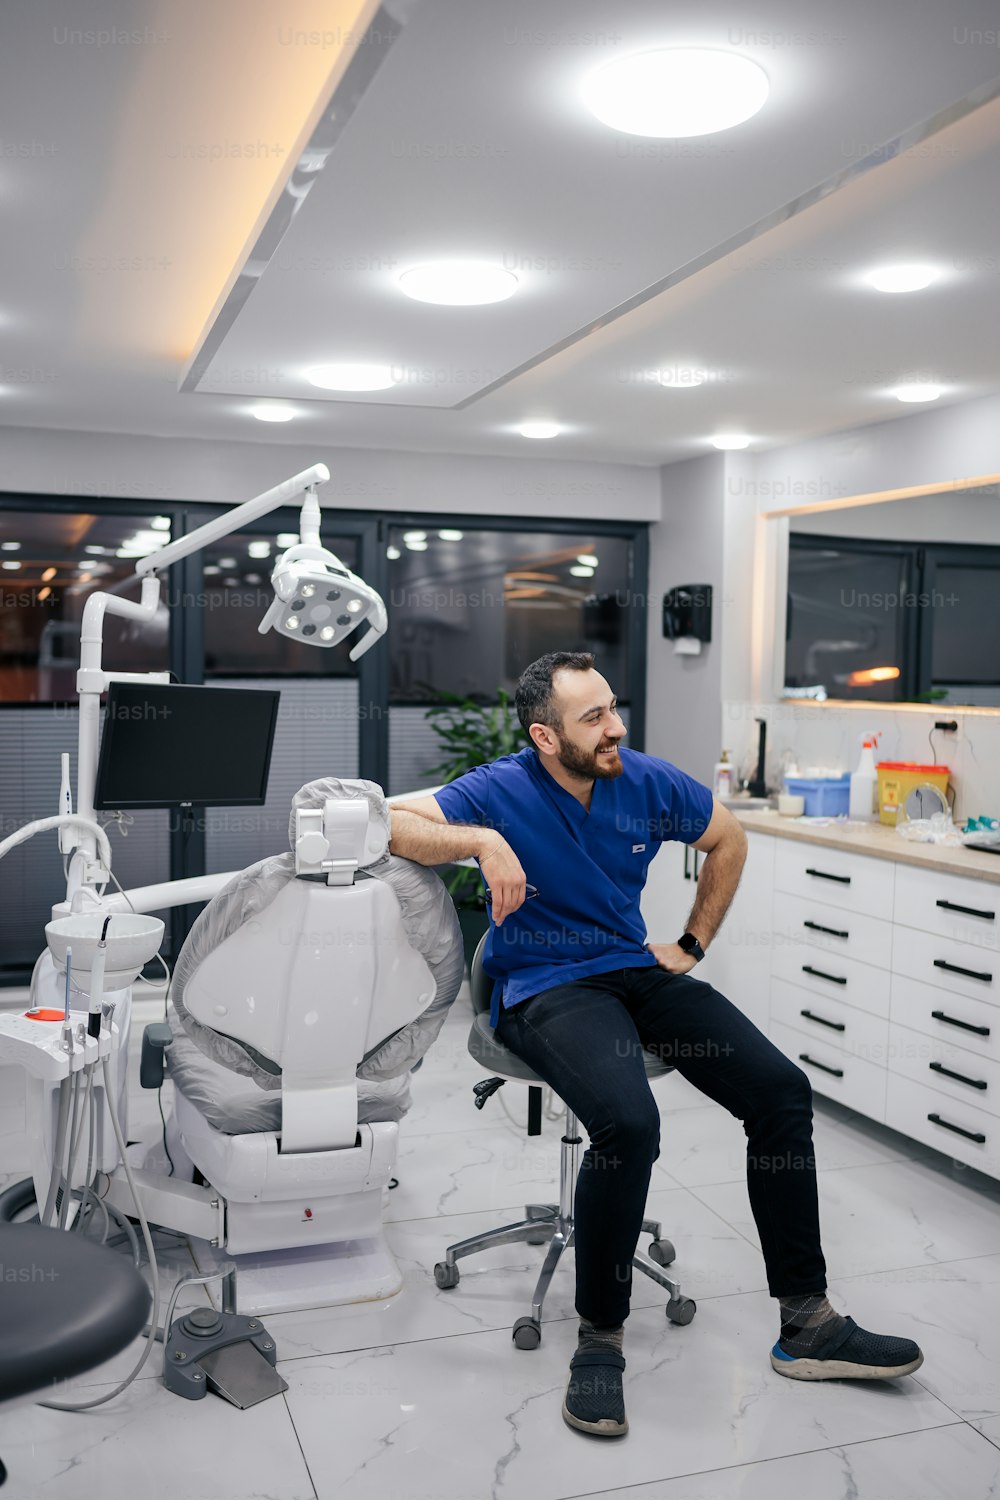 a man sitting on a chair in a dental room